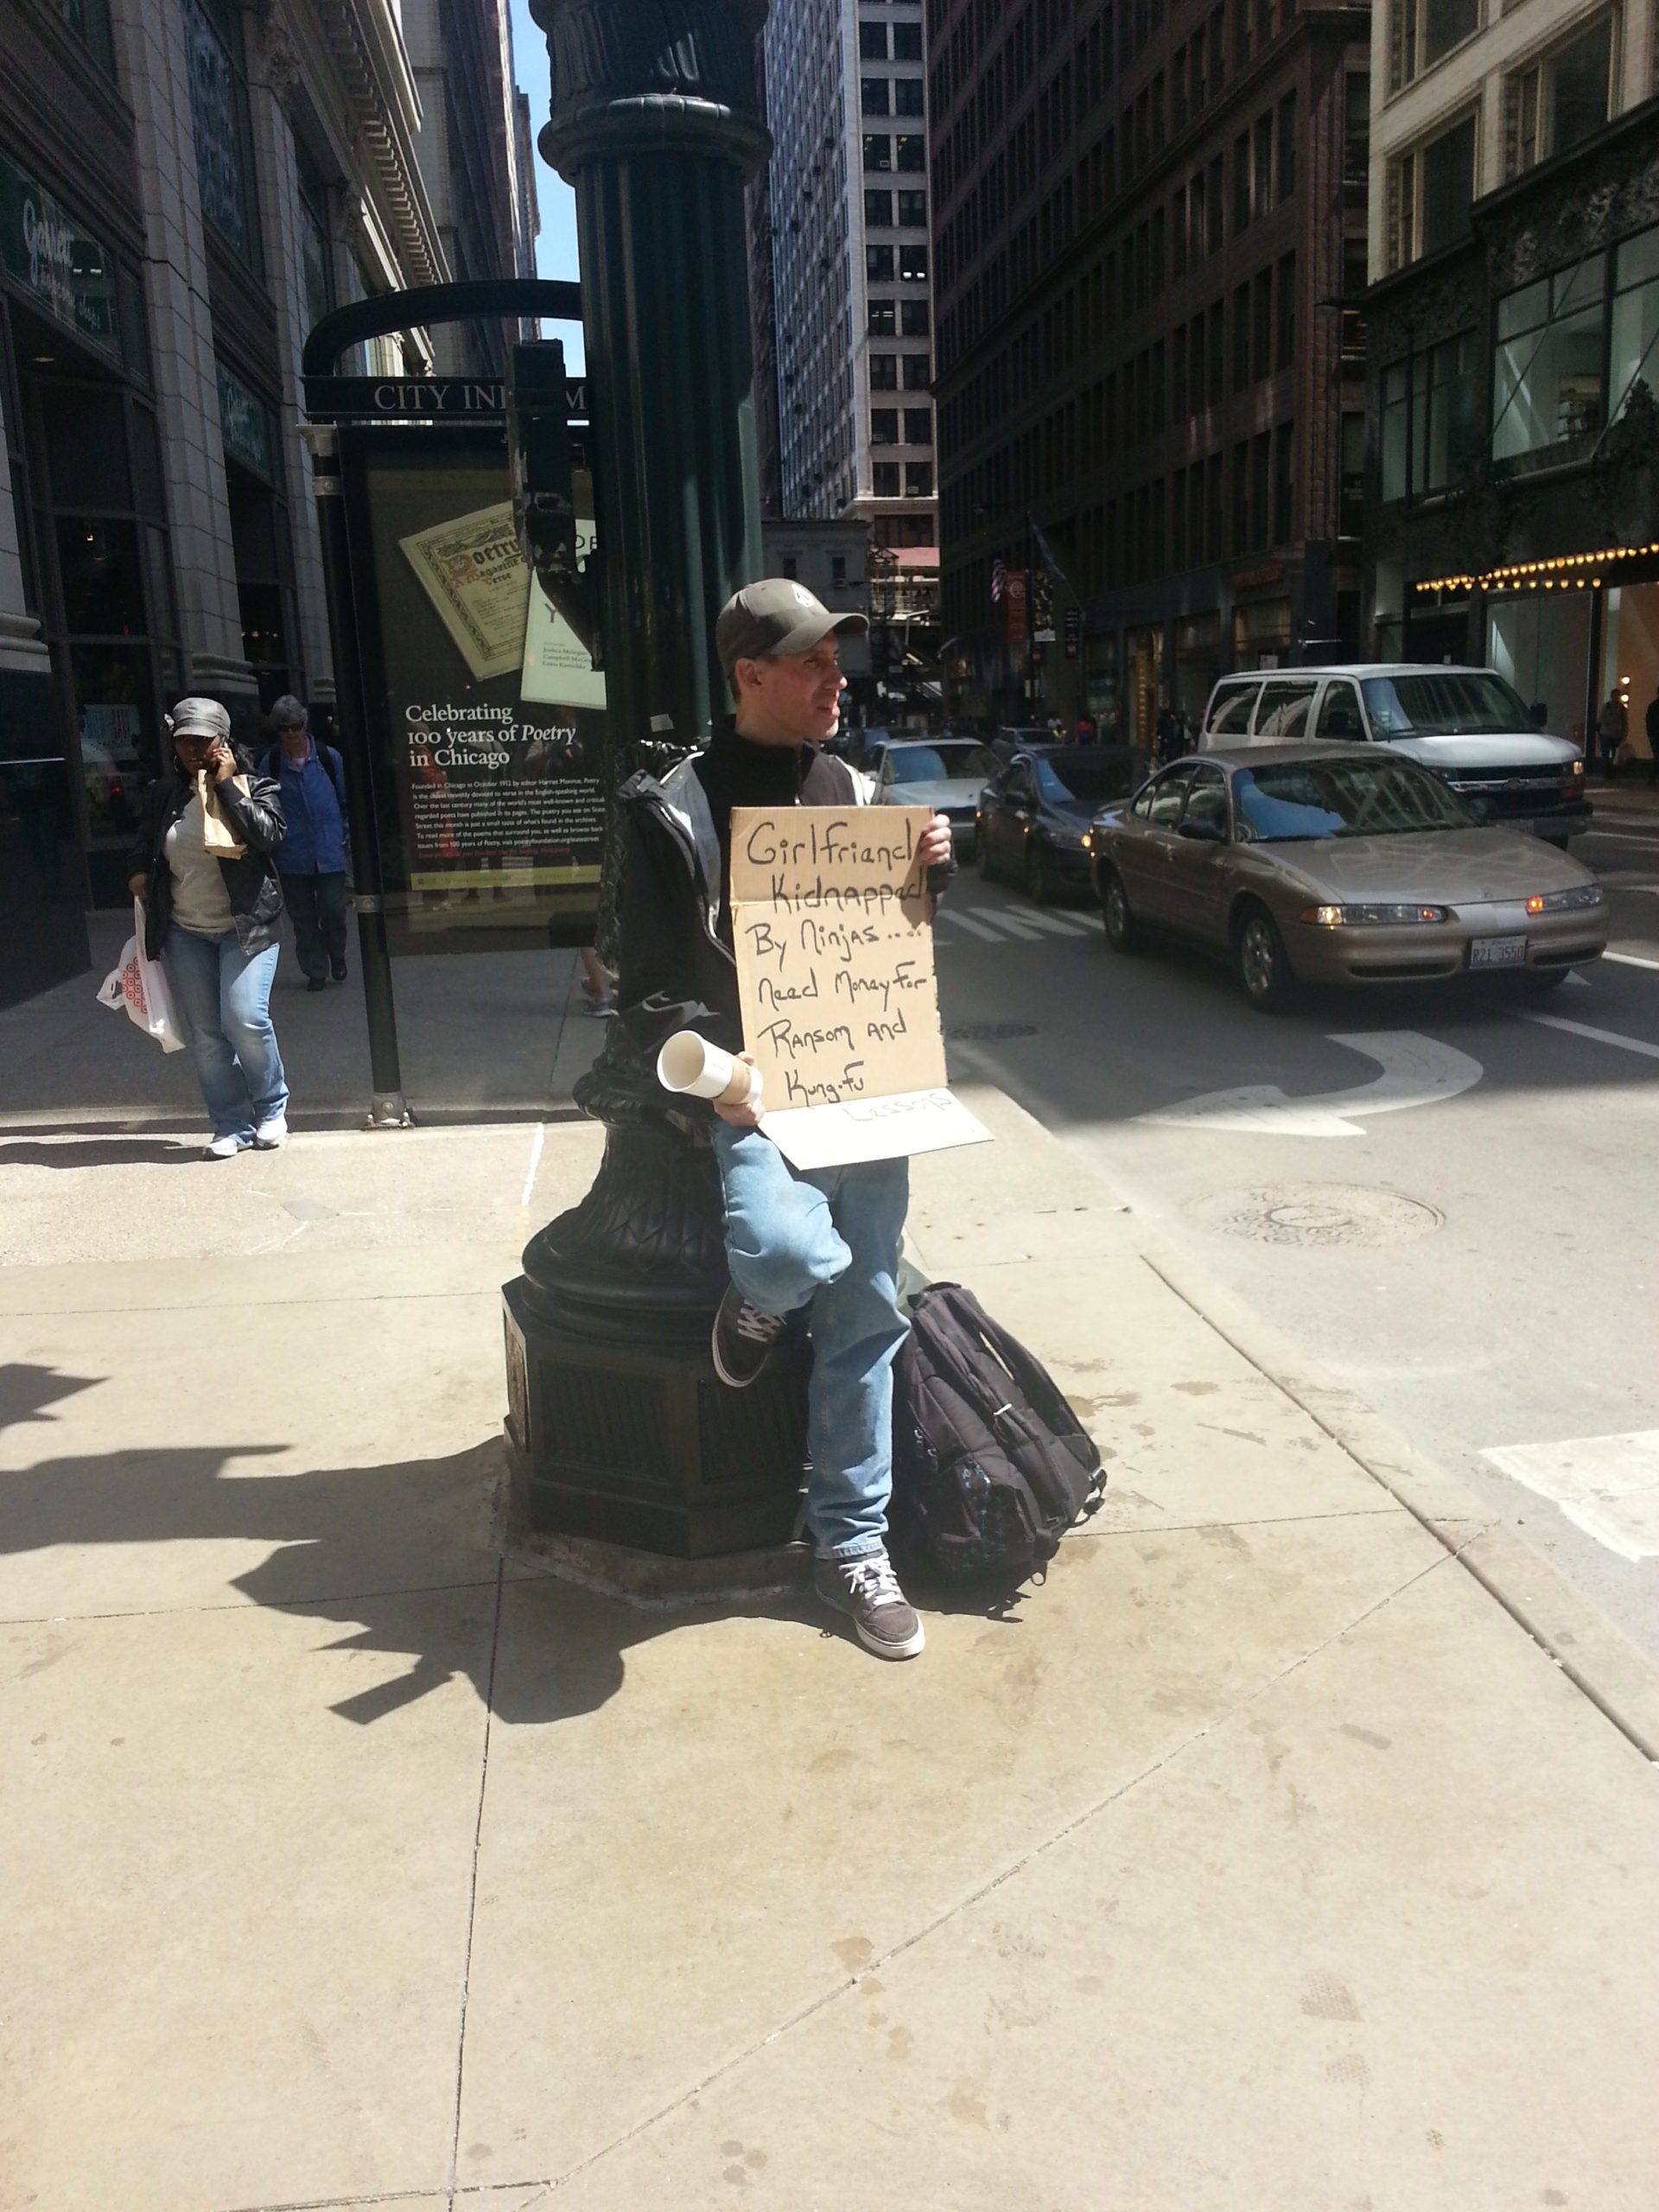 The best panhandling ever: girlfriend captured by ninjas need money for kung foo lessons